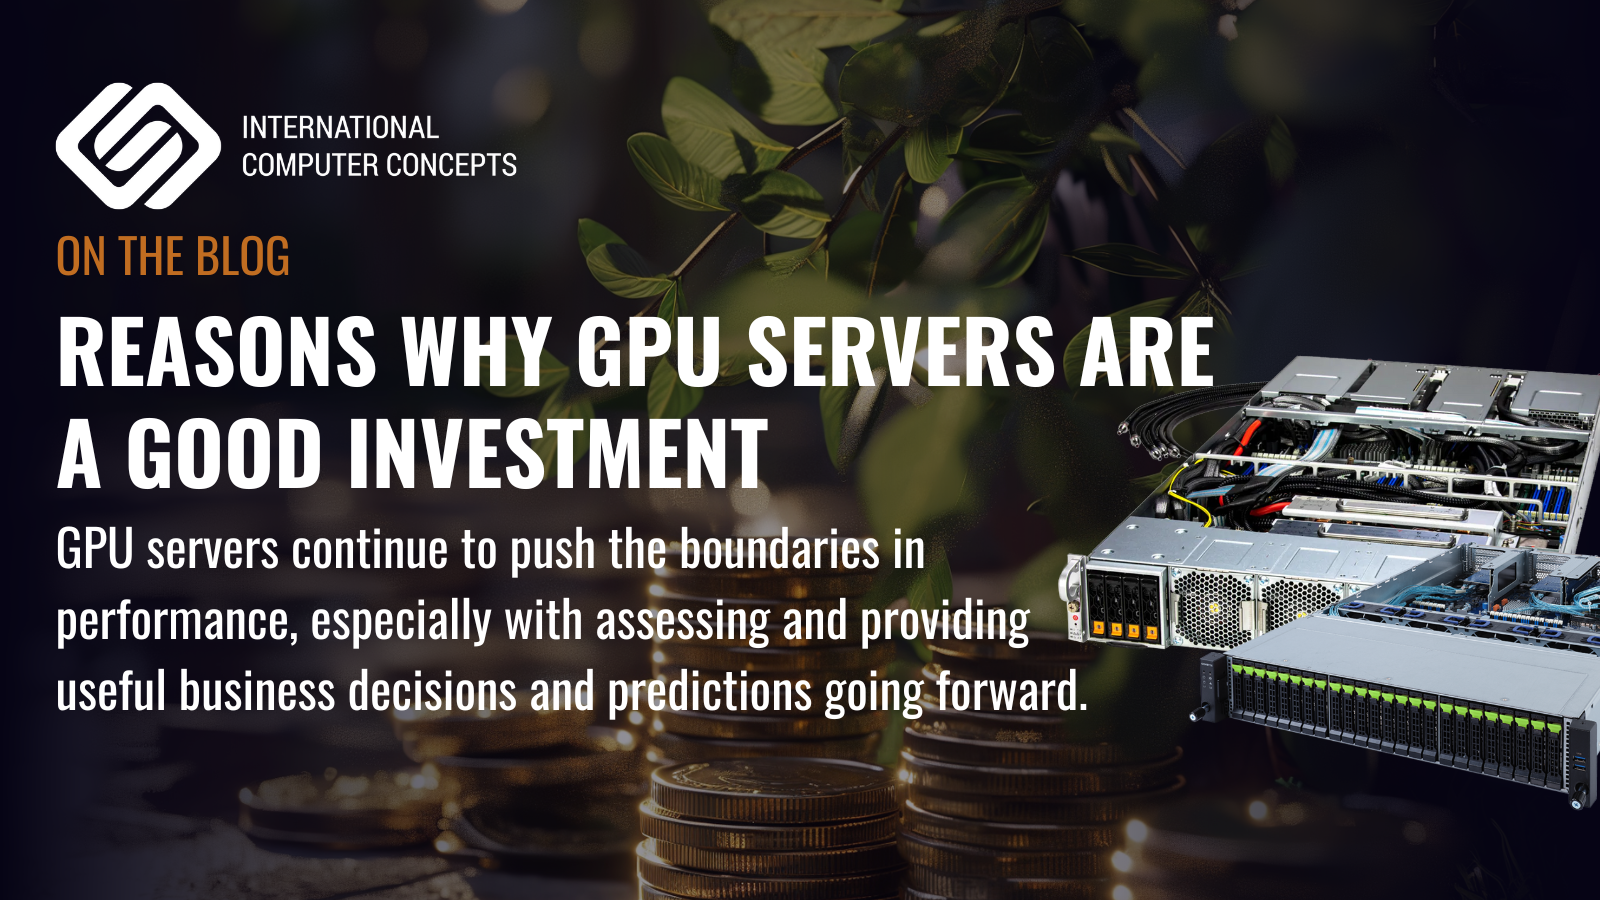 Reasons Why GPU Servers Are a Good Investment